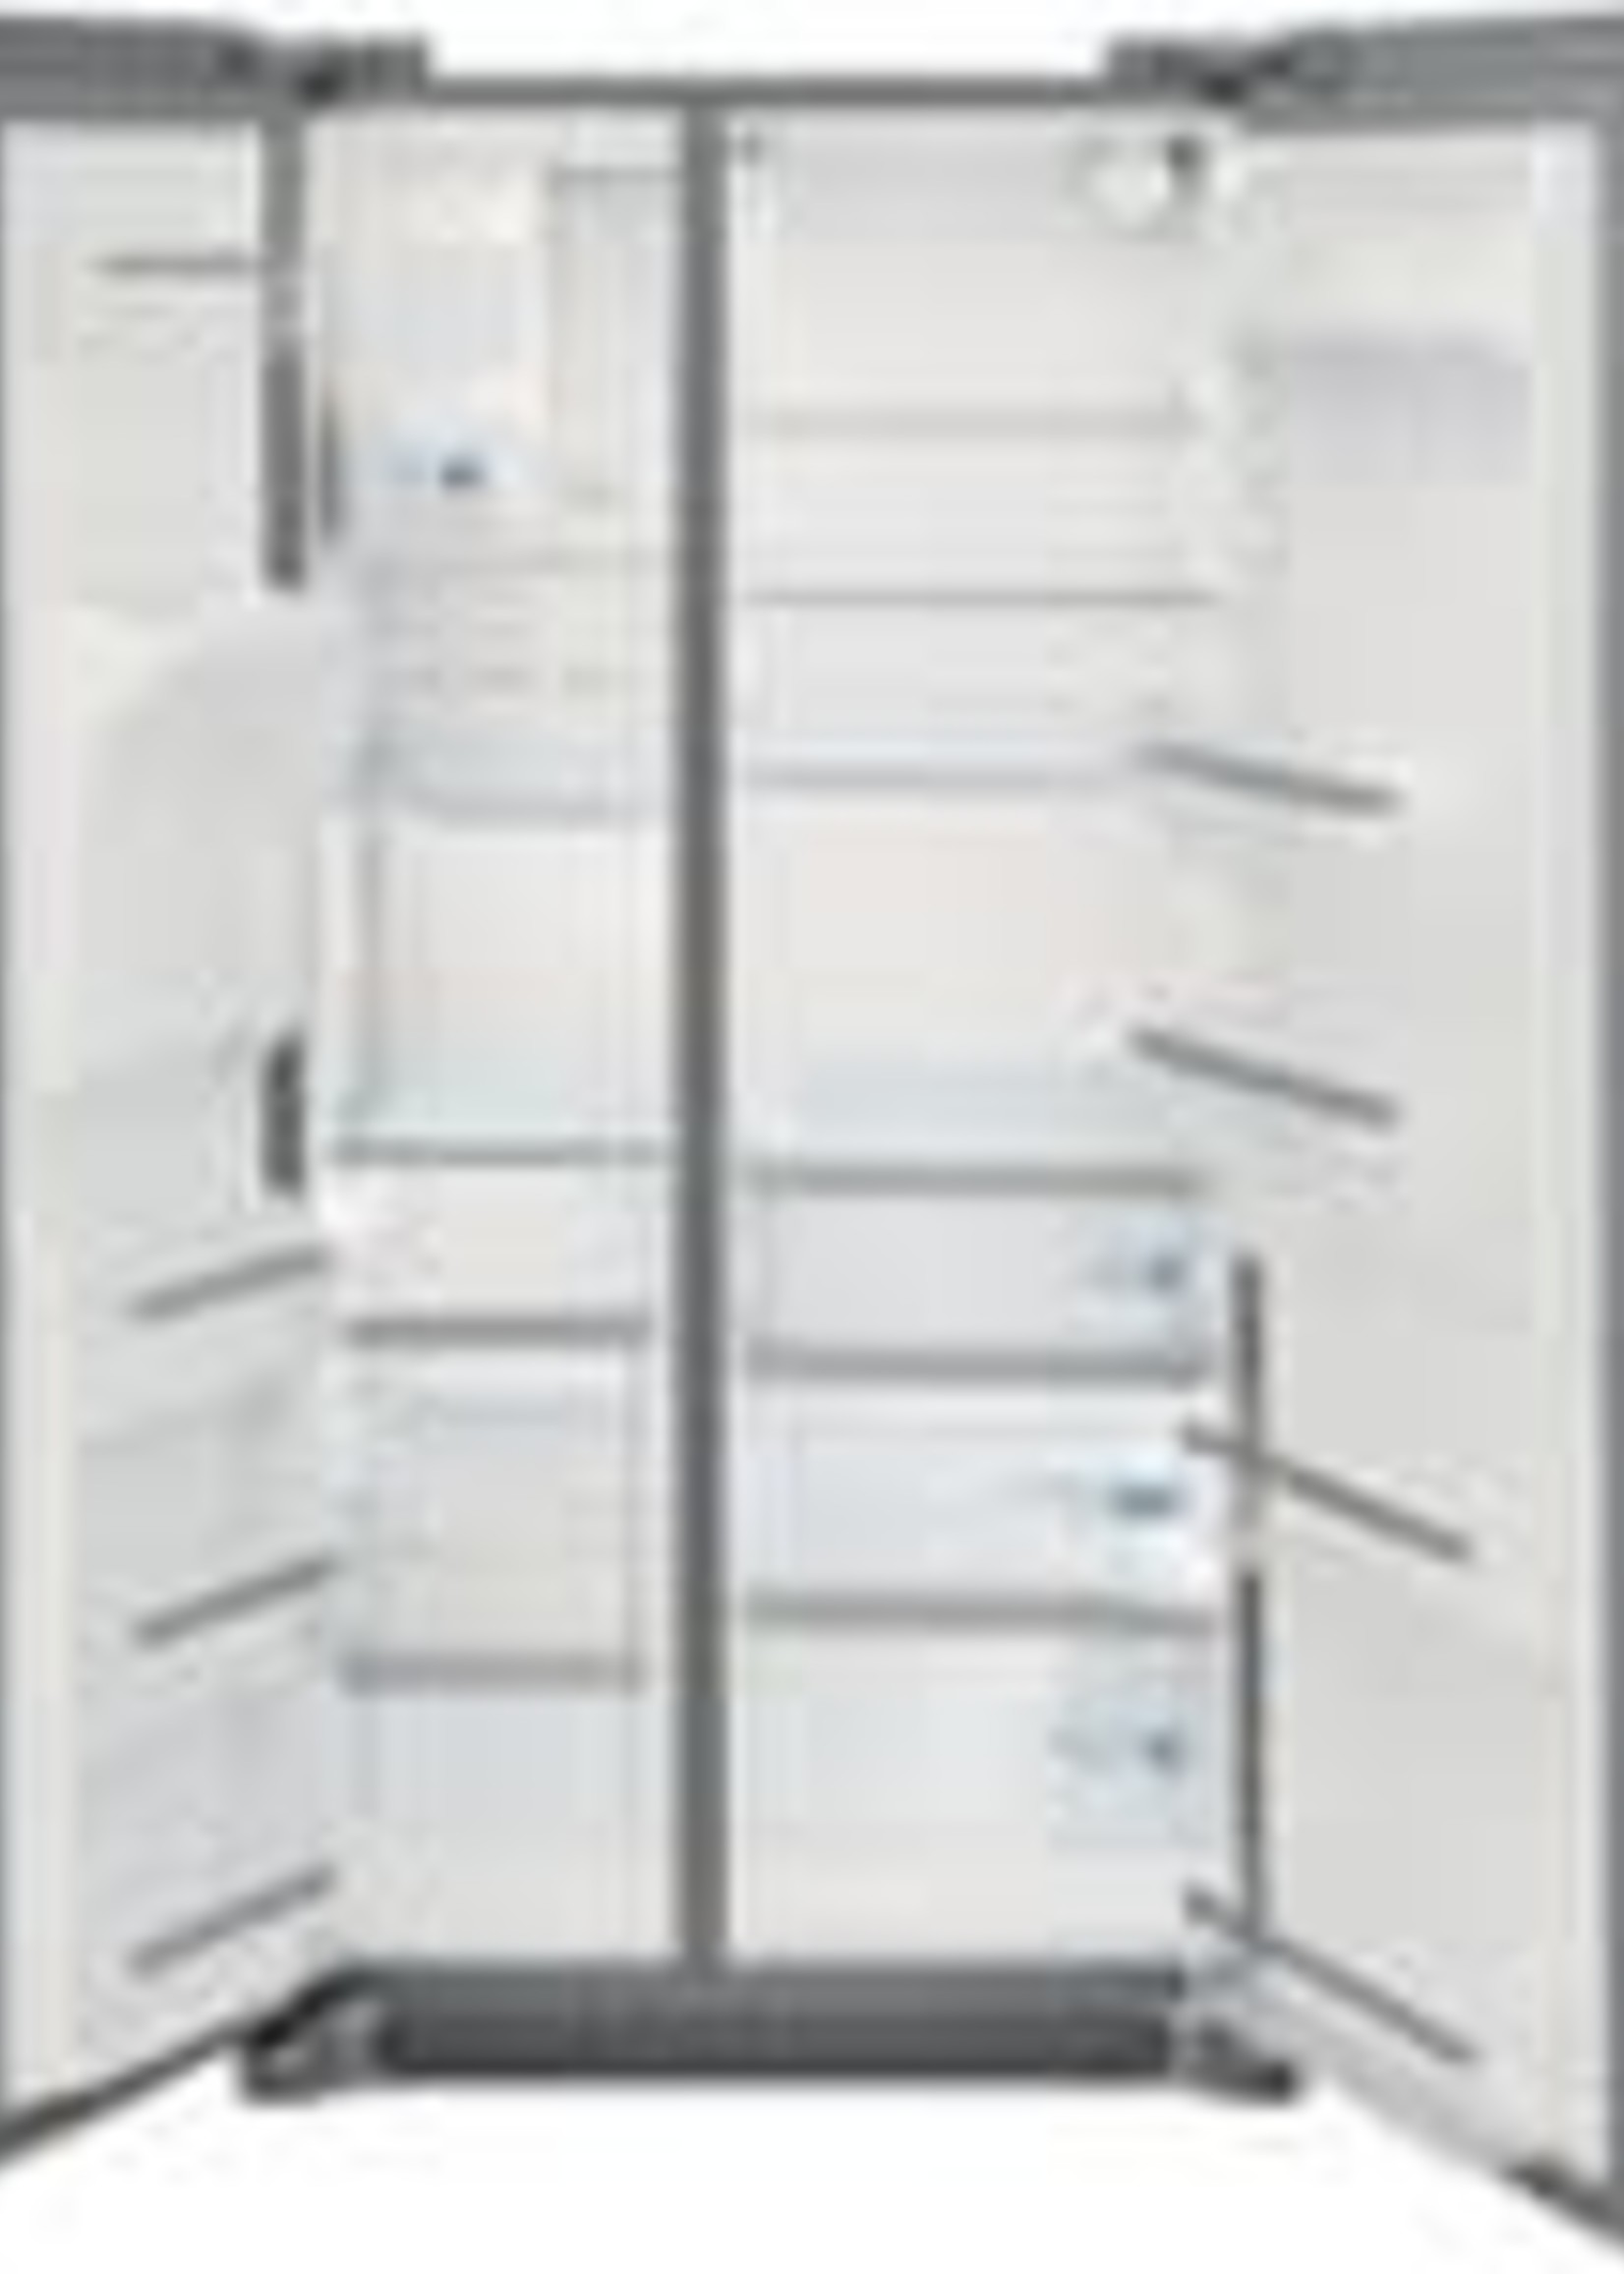 Frigidaire *Frigidaire GRSS2652AF  Gallery 25.6-cu ft Side-by-Side Refrigerator with Ice Maker (Smudge-proof Stainless Steel) ENERGY STAR